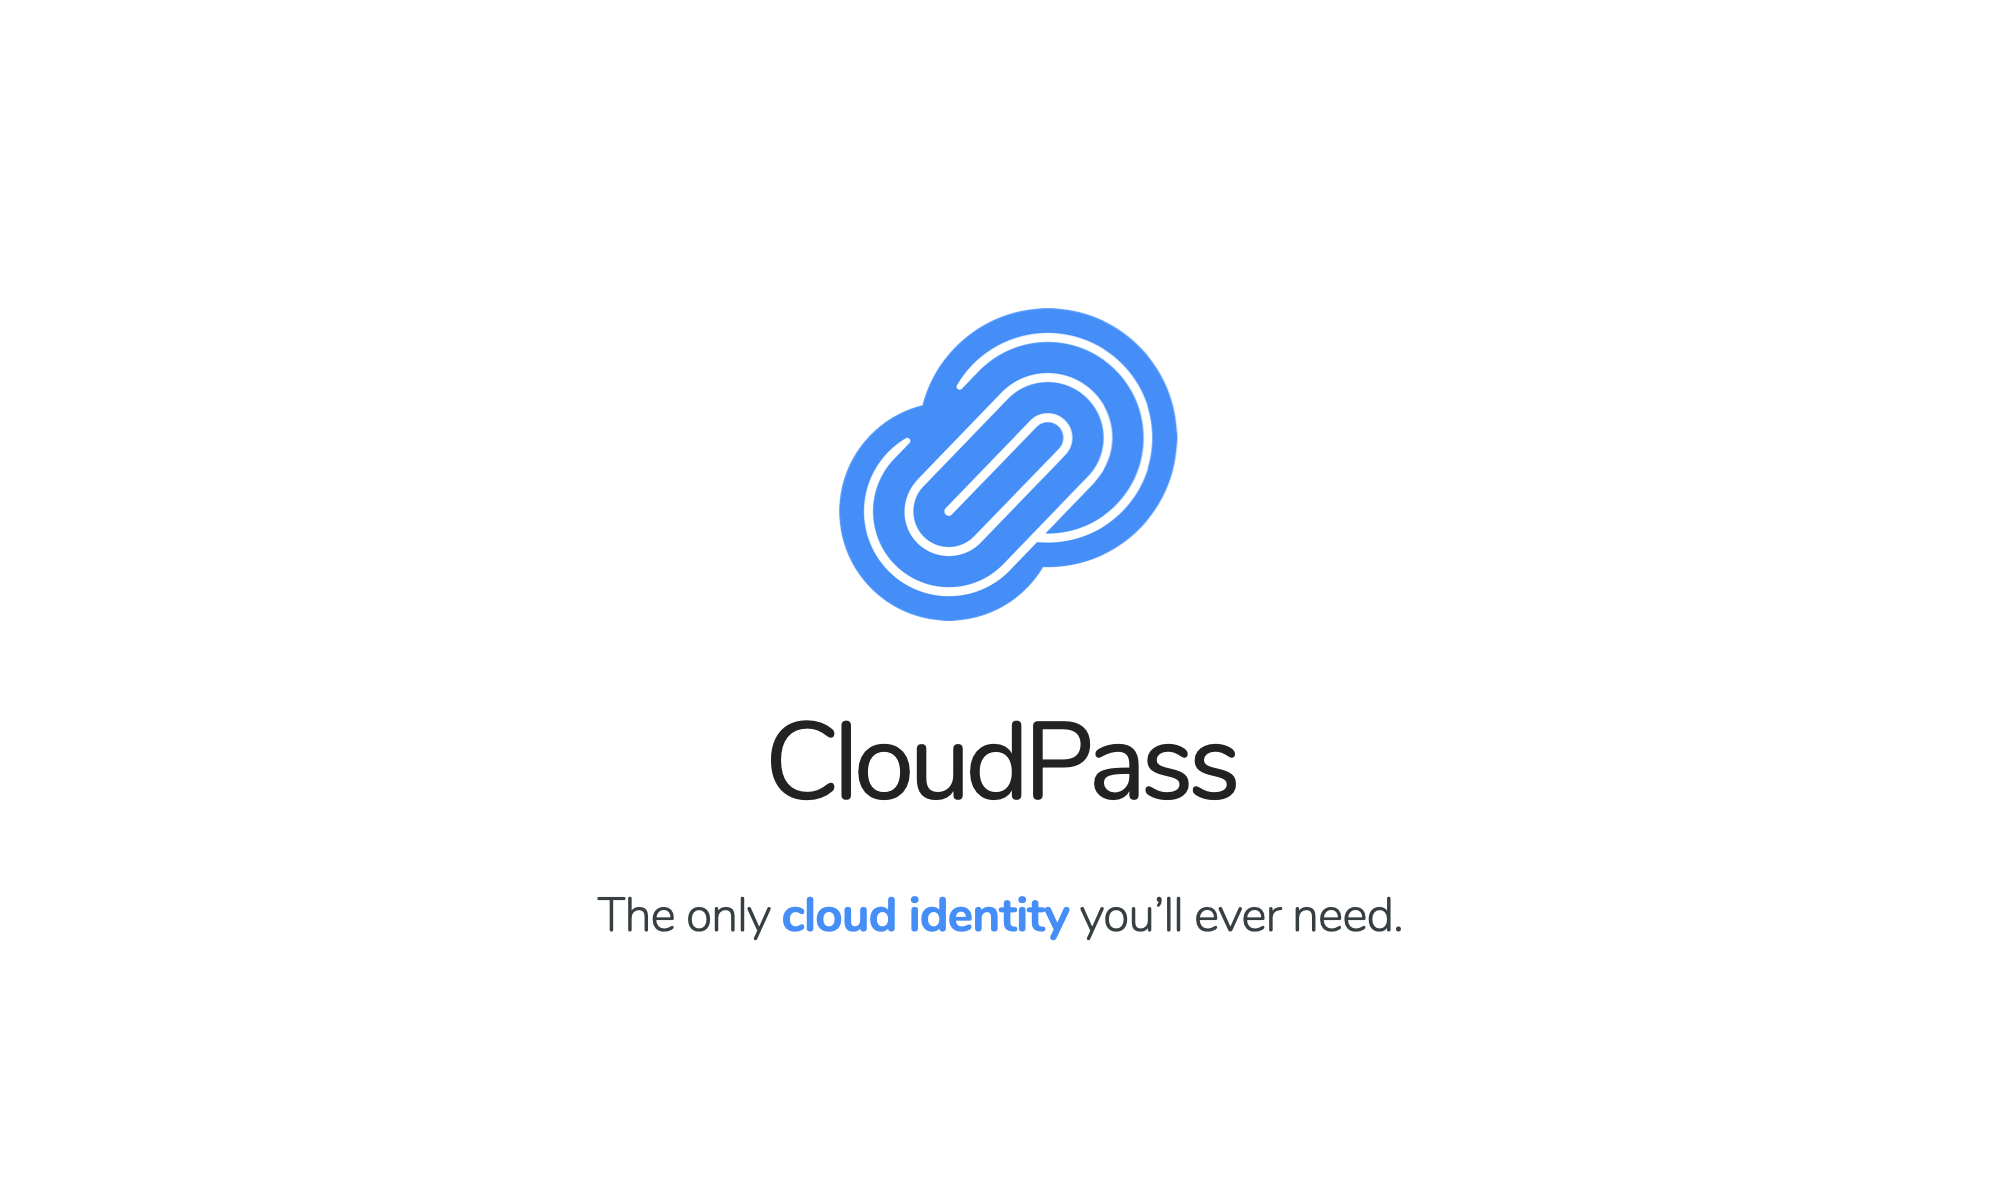 CloudPass — The Only Cloud ID You'll Ever Need